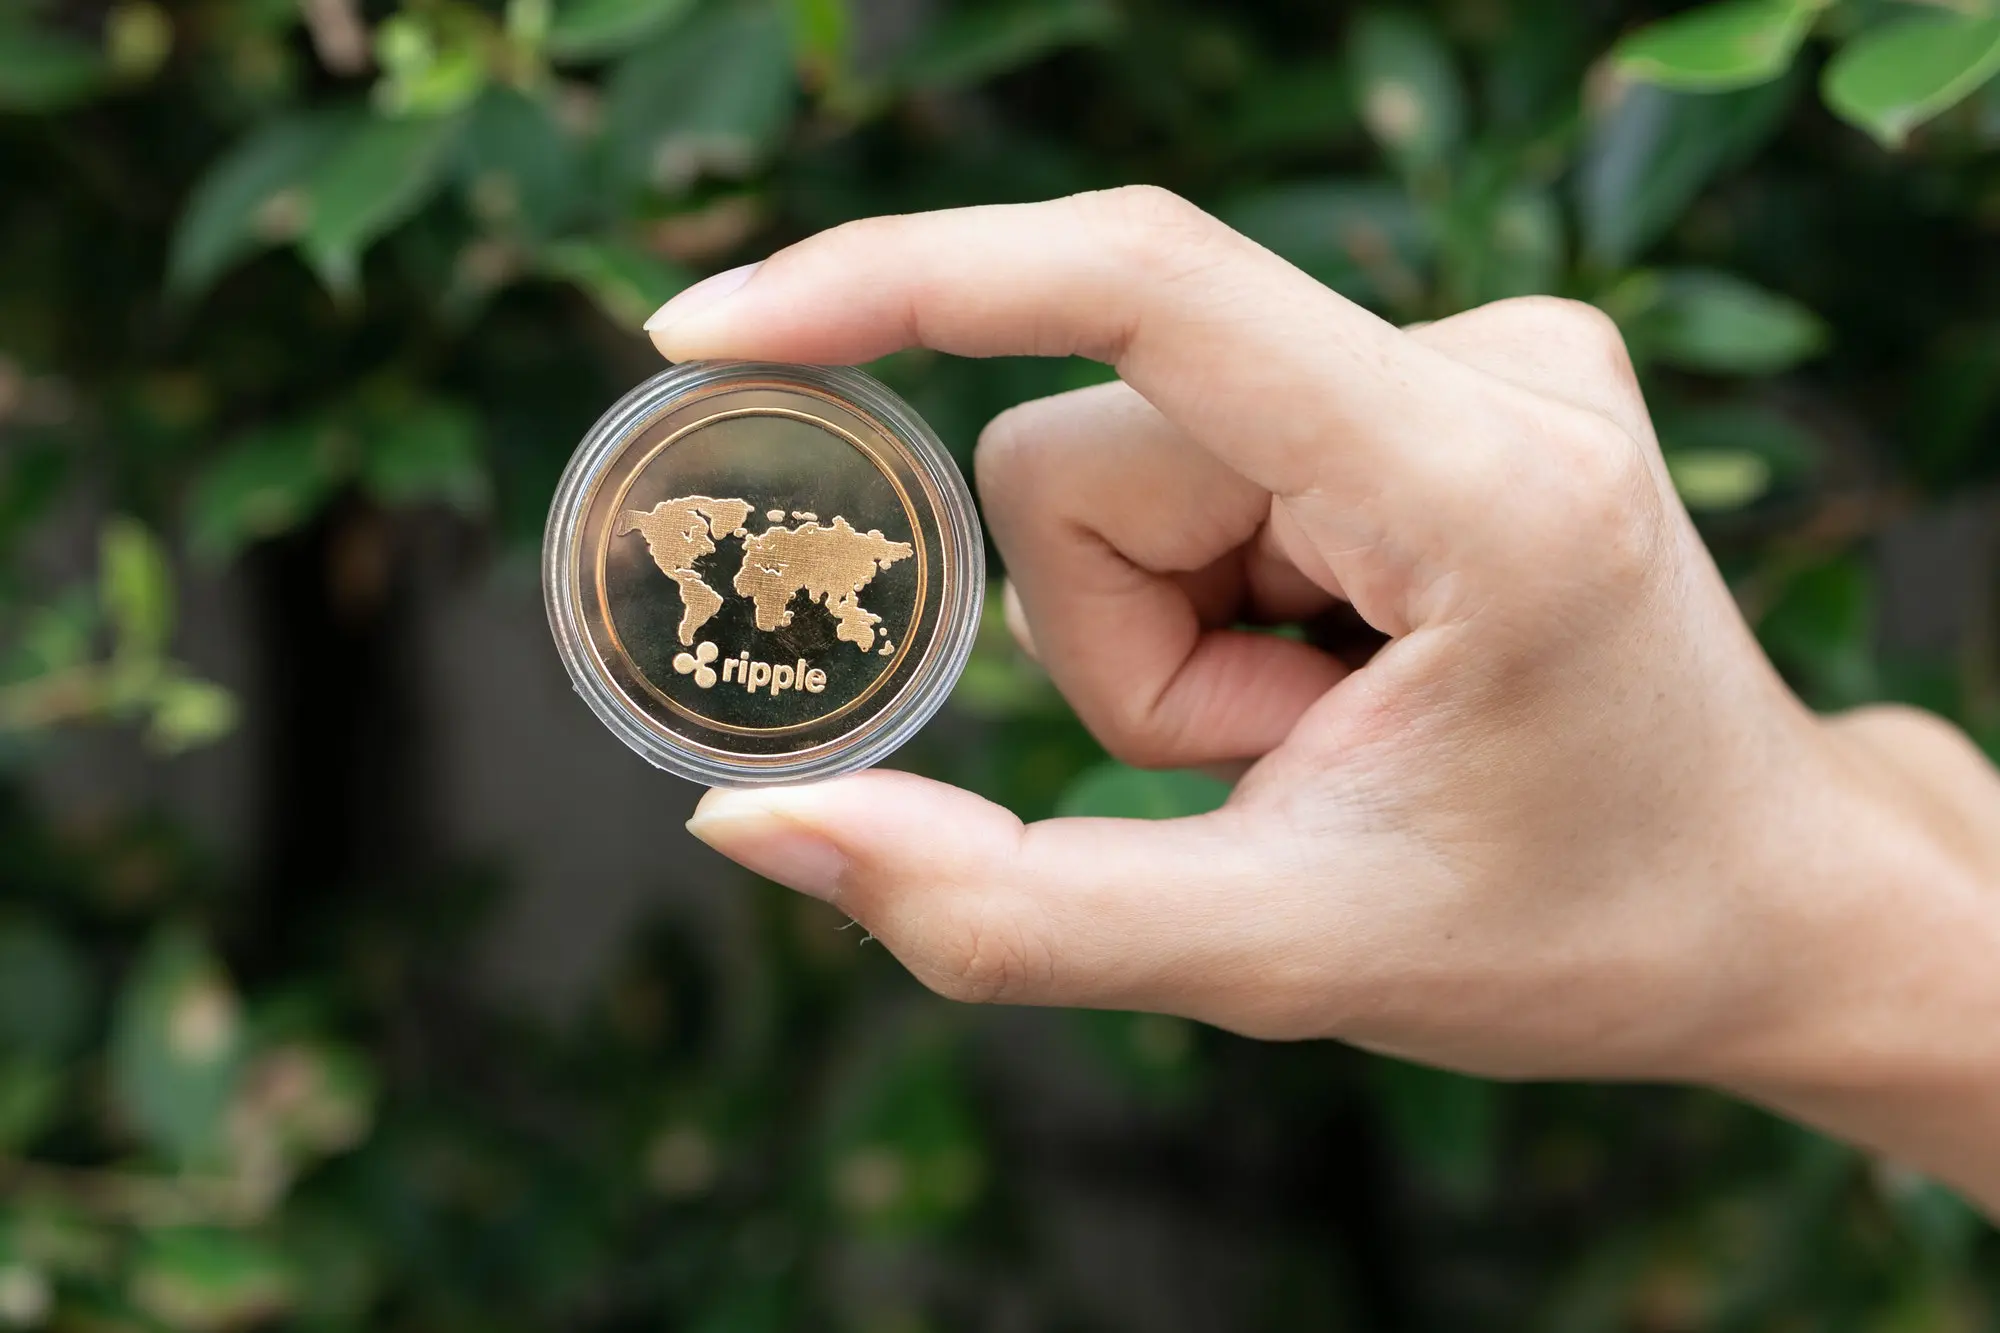 Young man holding XRP Ripple coin in hand with green bush in background